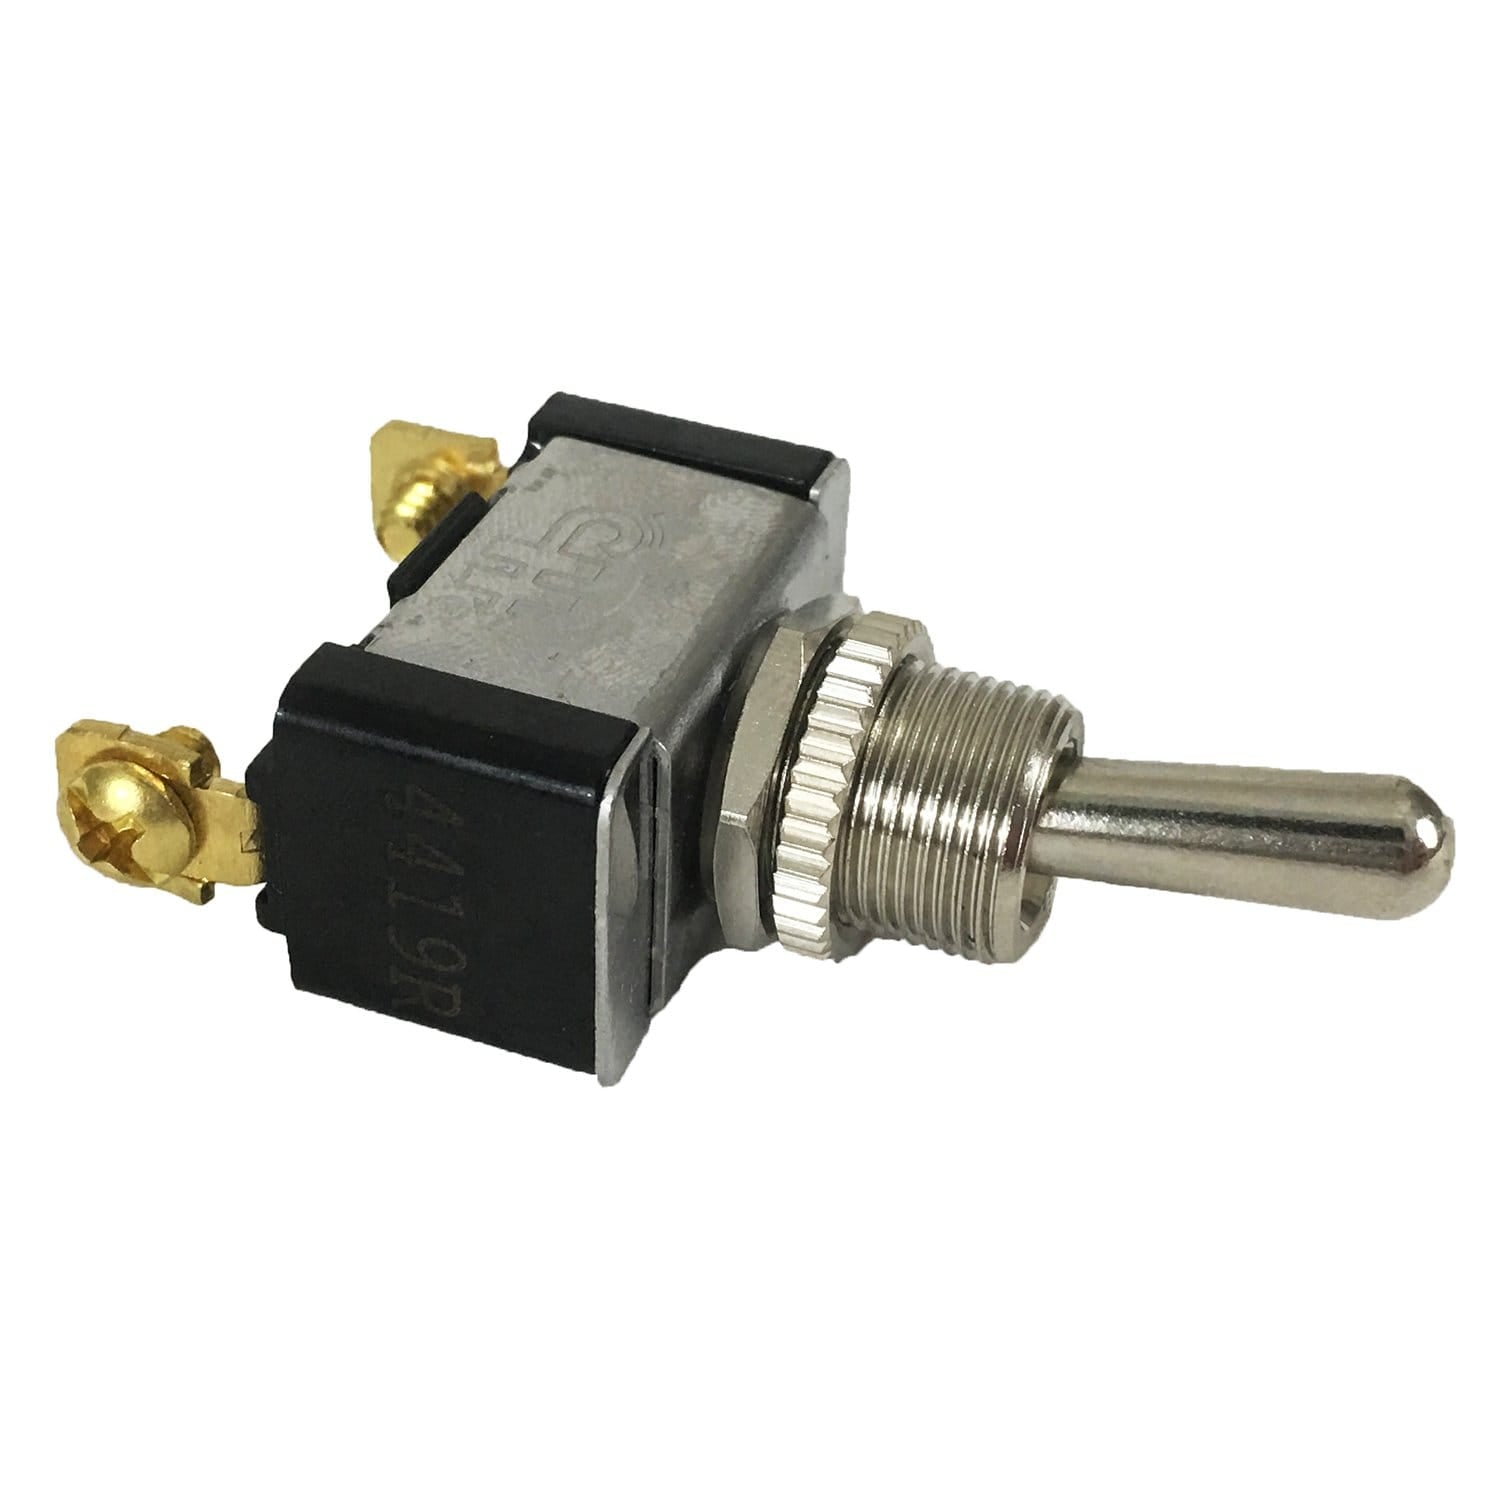 Cole Hersee 5520 Standard Heavy Duty Toggle Switch